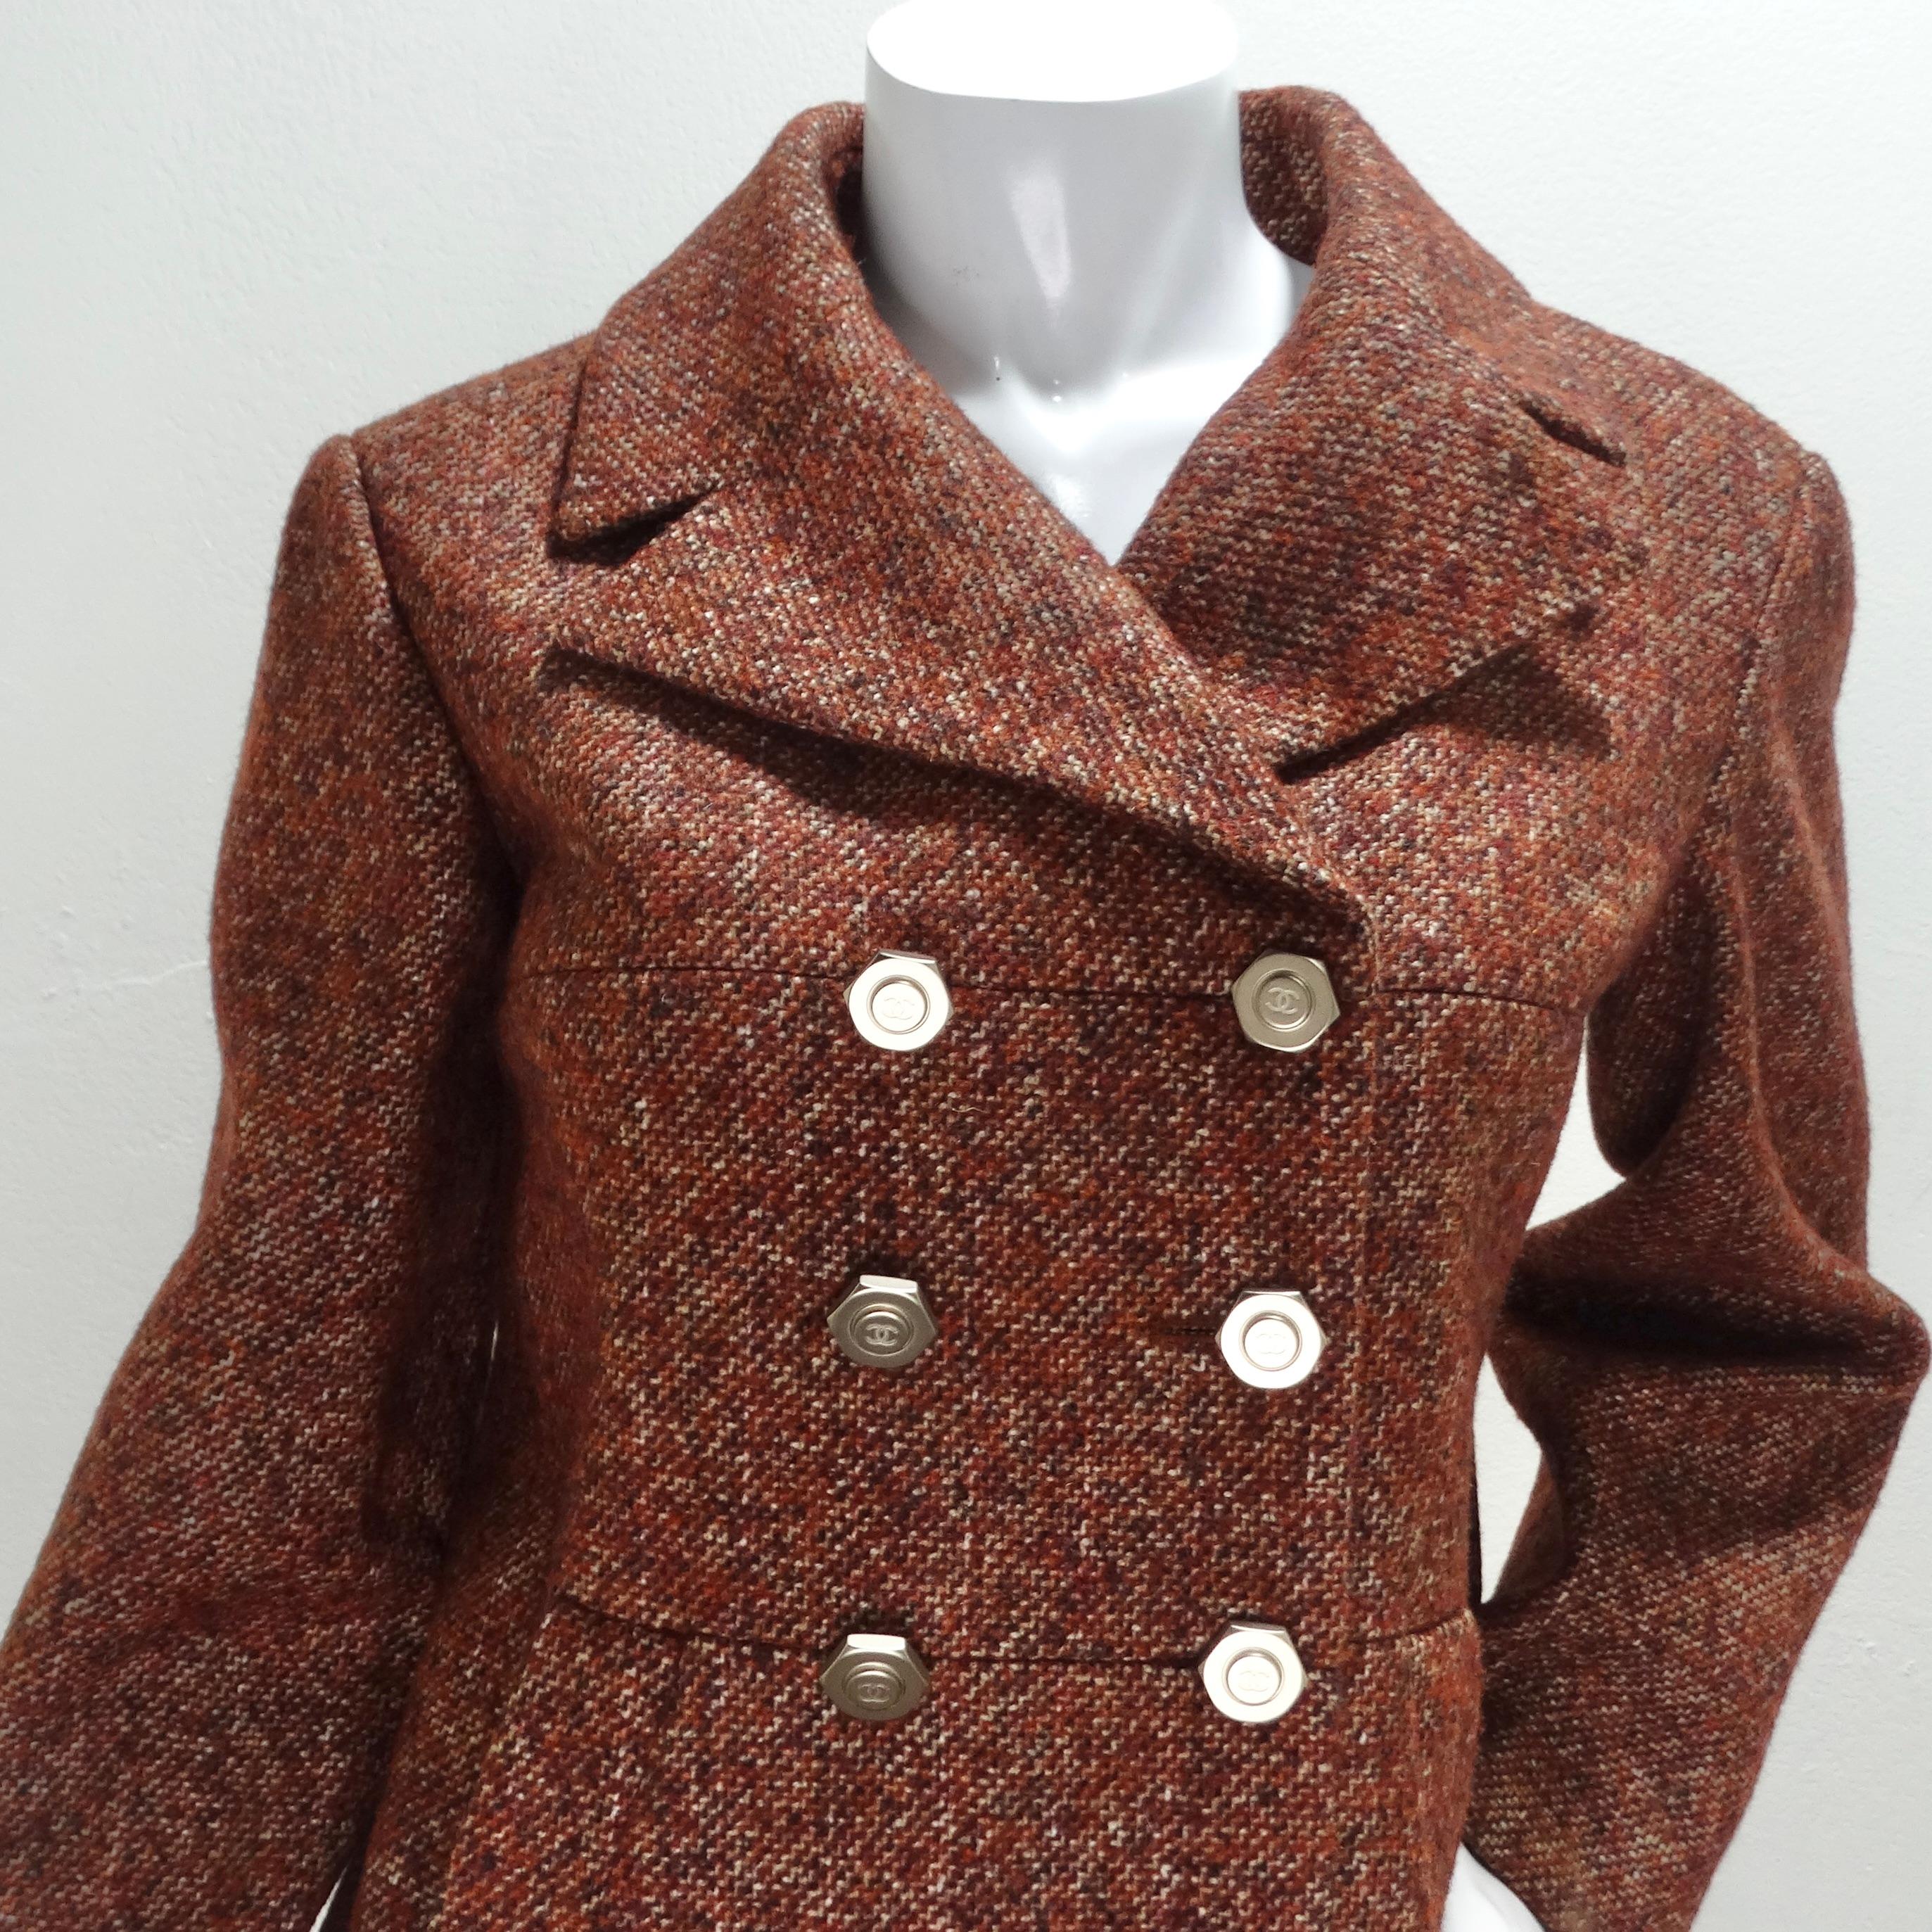 Elevate your wardrobe to new heights of sophistication with this Chanel Brand New Tweed Blazer. In a stunning warm brown/red tone tweed, this blazer is the epitome of classic Chanel elegance. The attention to detail is impeccable, with an array of